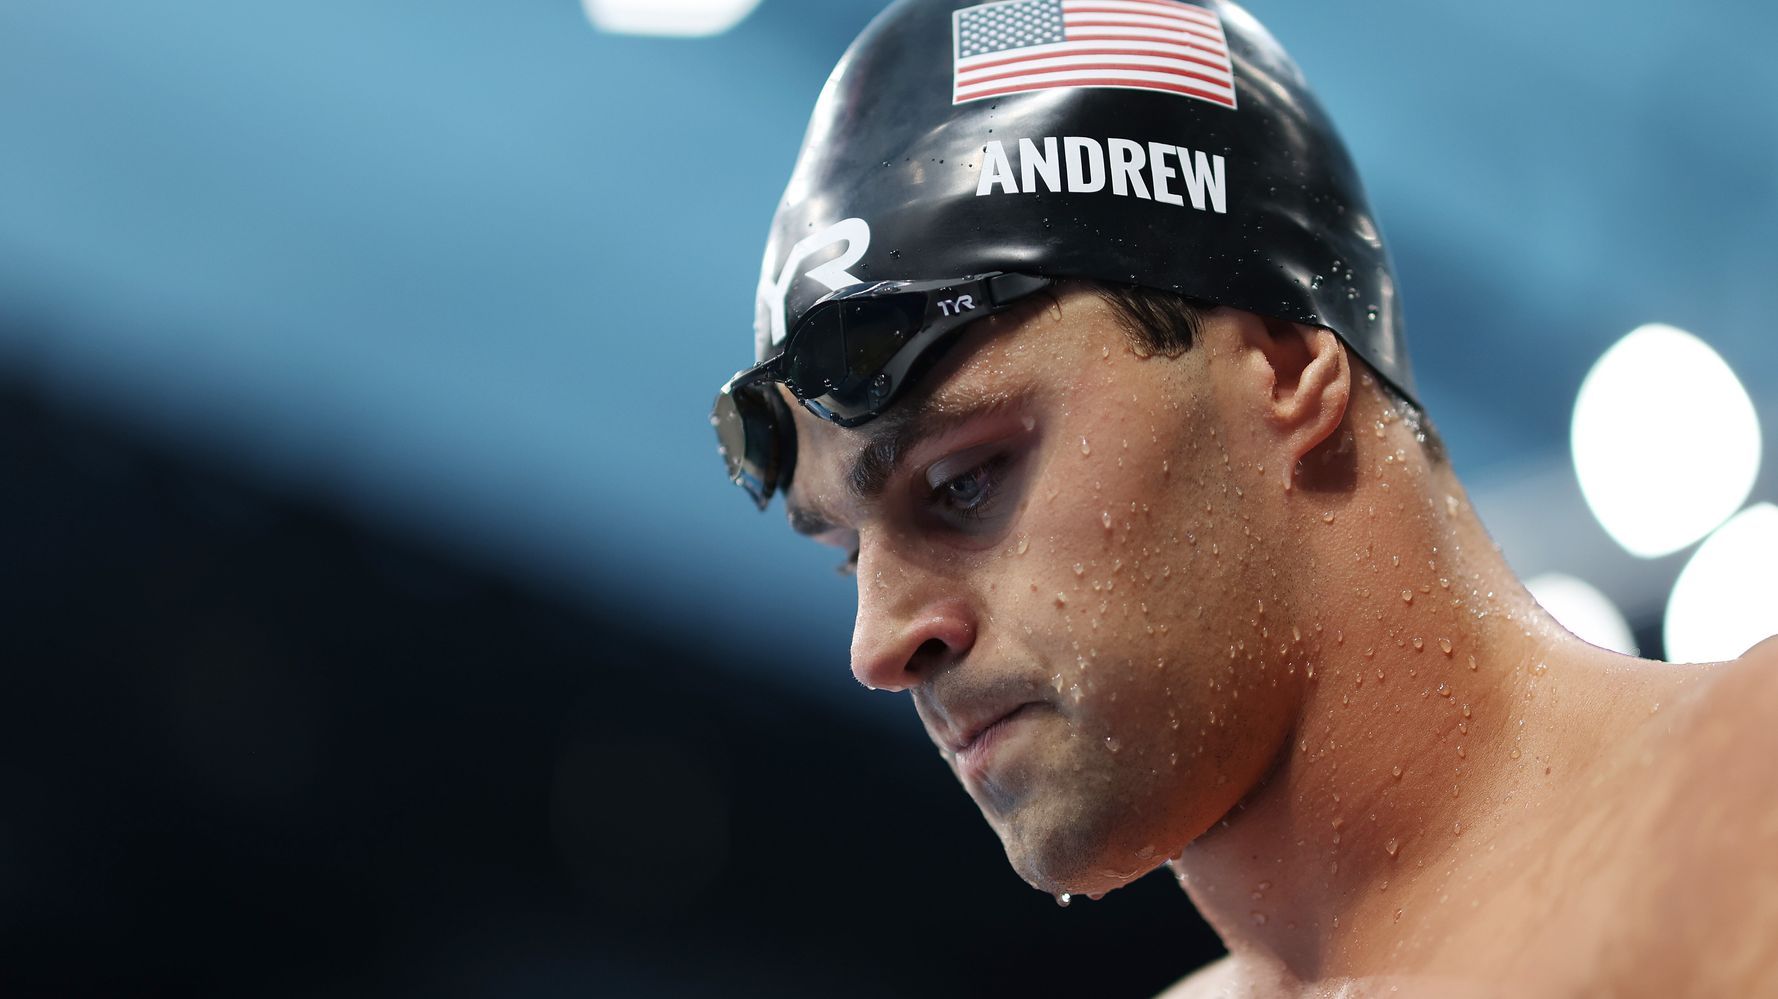 Unvaccinated Swimmer Michael Andrew's Mask Refusal At Olympics Prompts U.S. Review